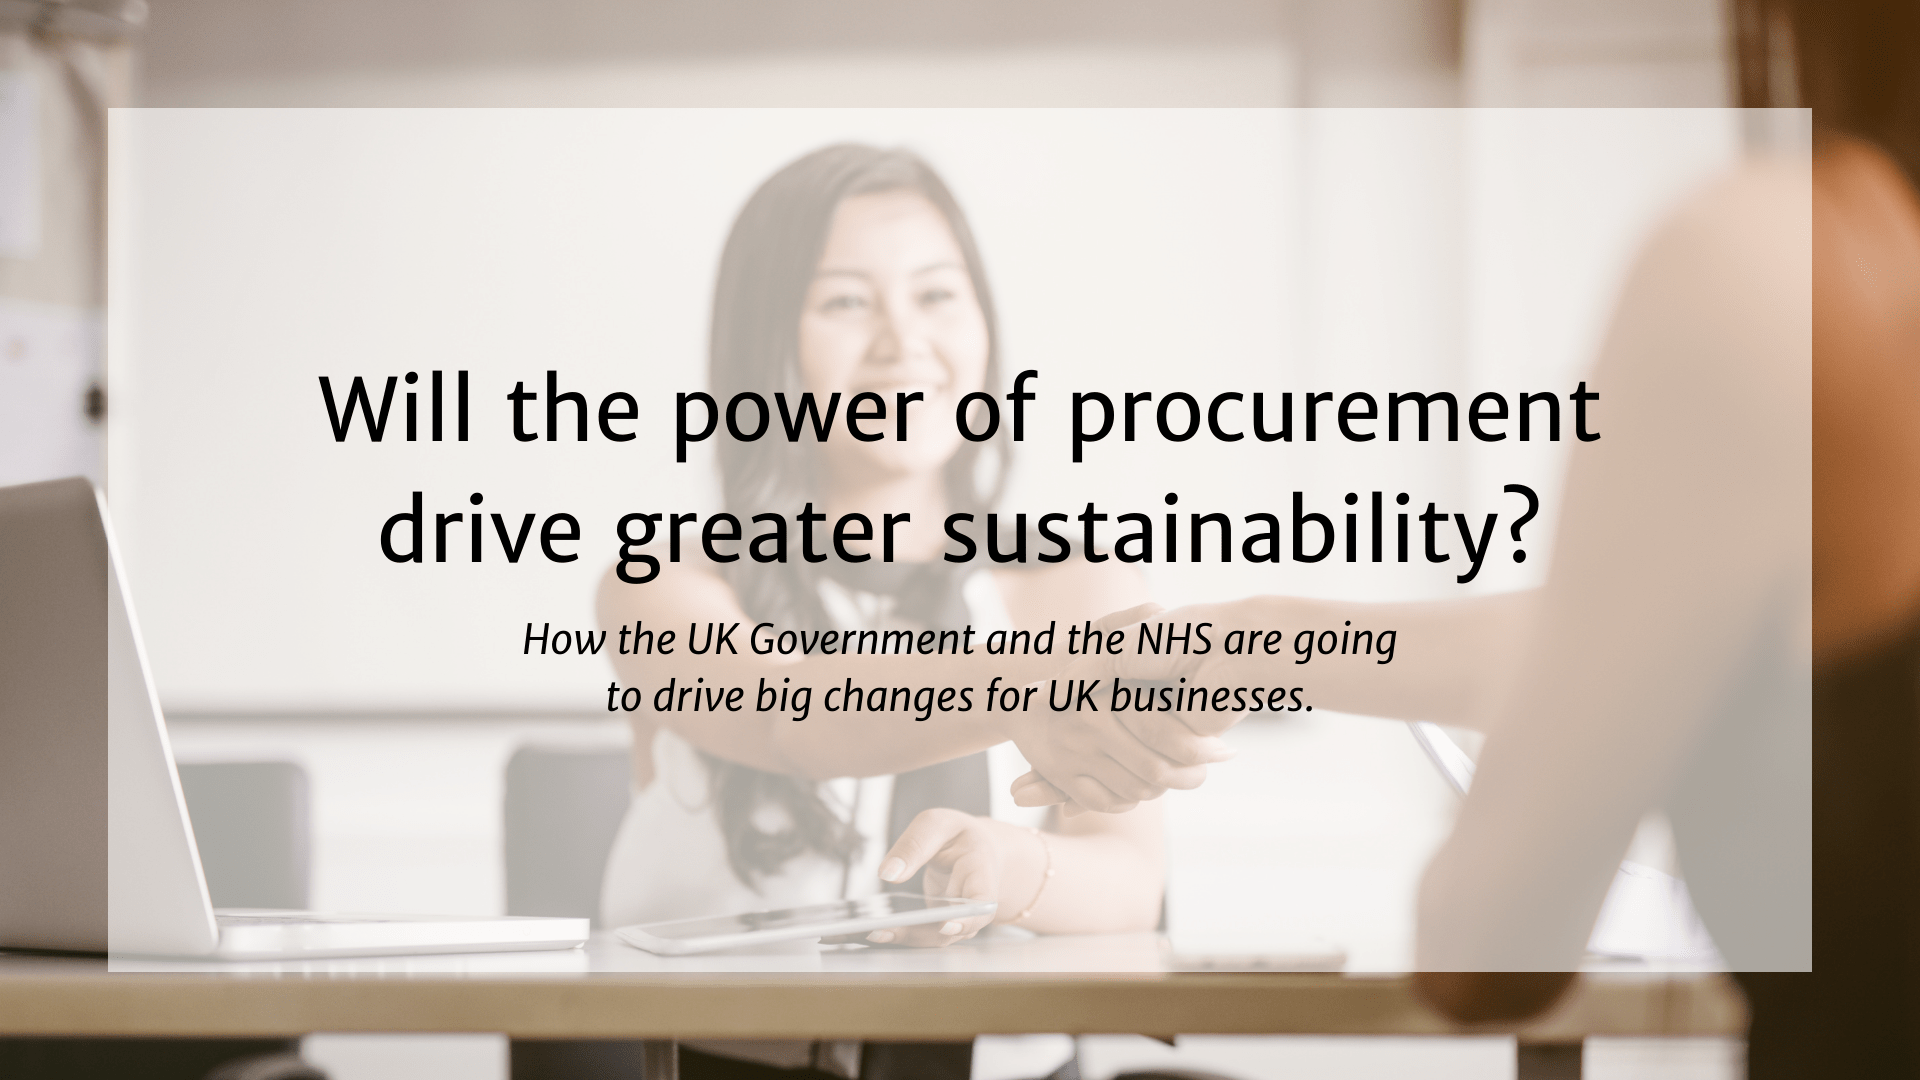 Will the power of procurement drive greater sustainability?